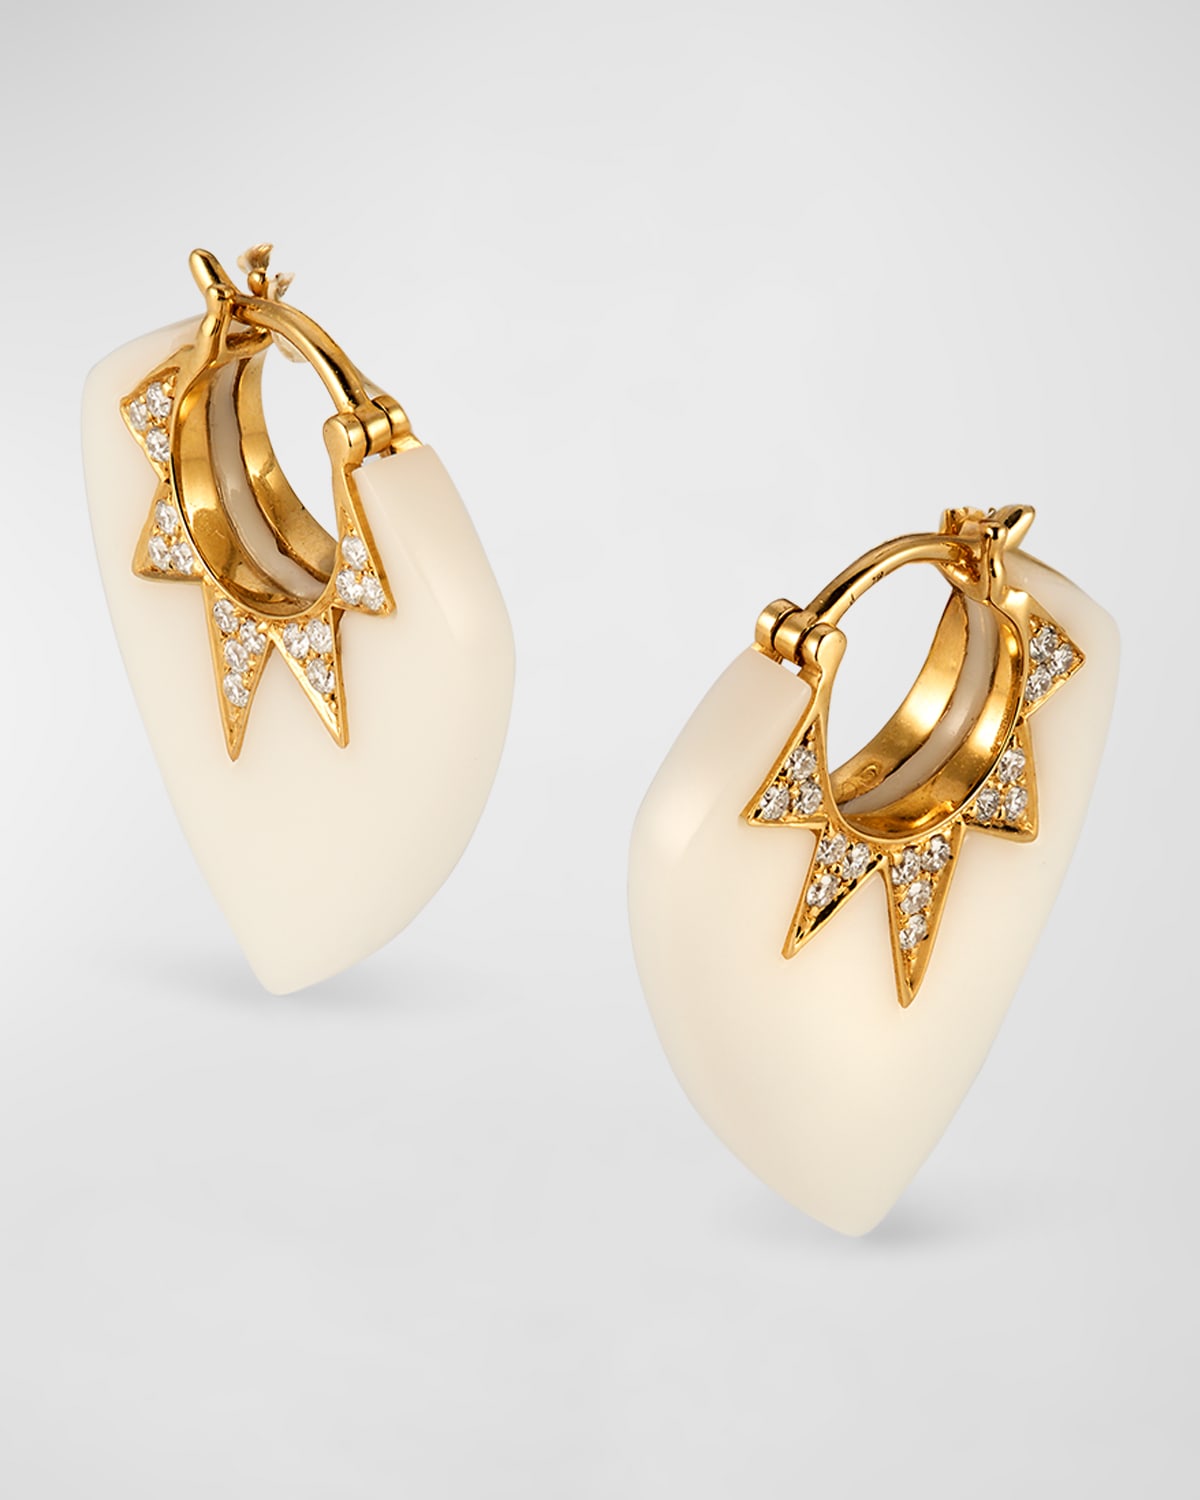 18K Yellow Gold Earrings with White Onyx and GH-SI Diamonds, 25x20mm